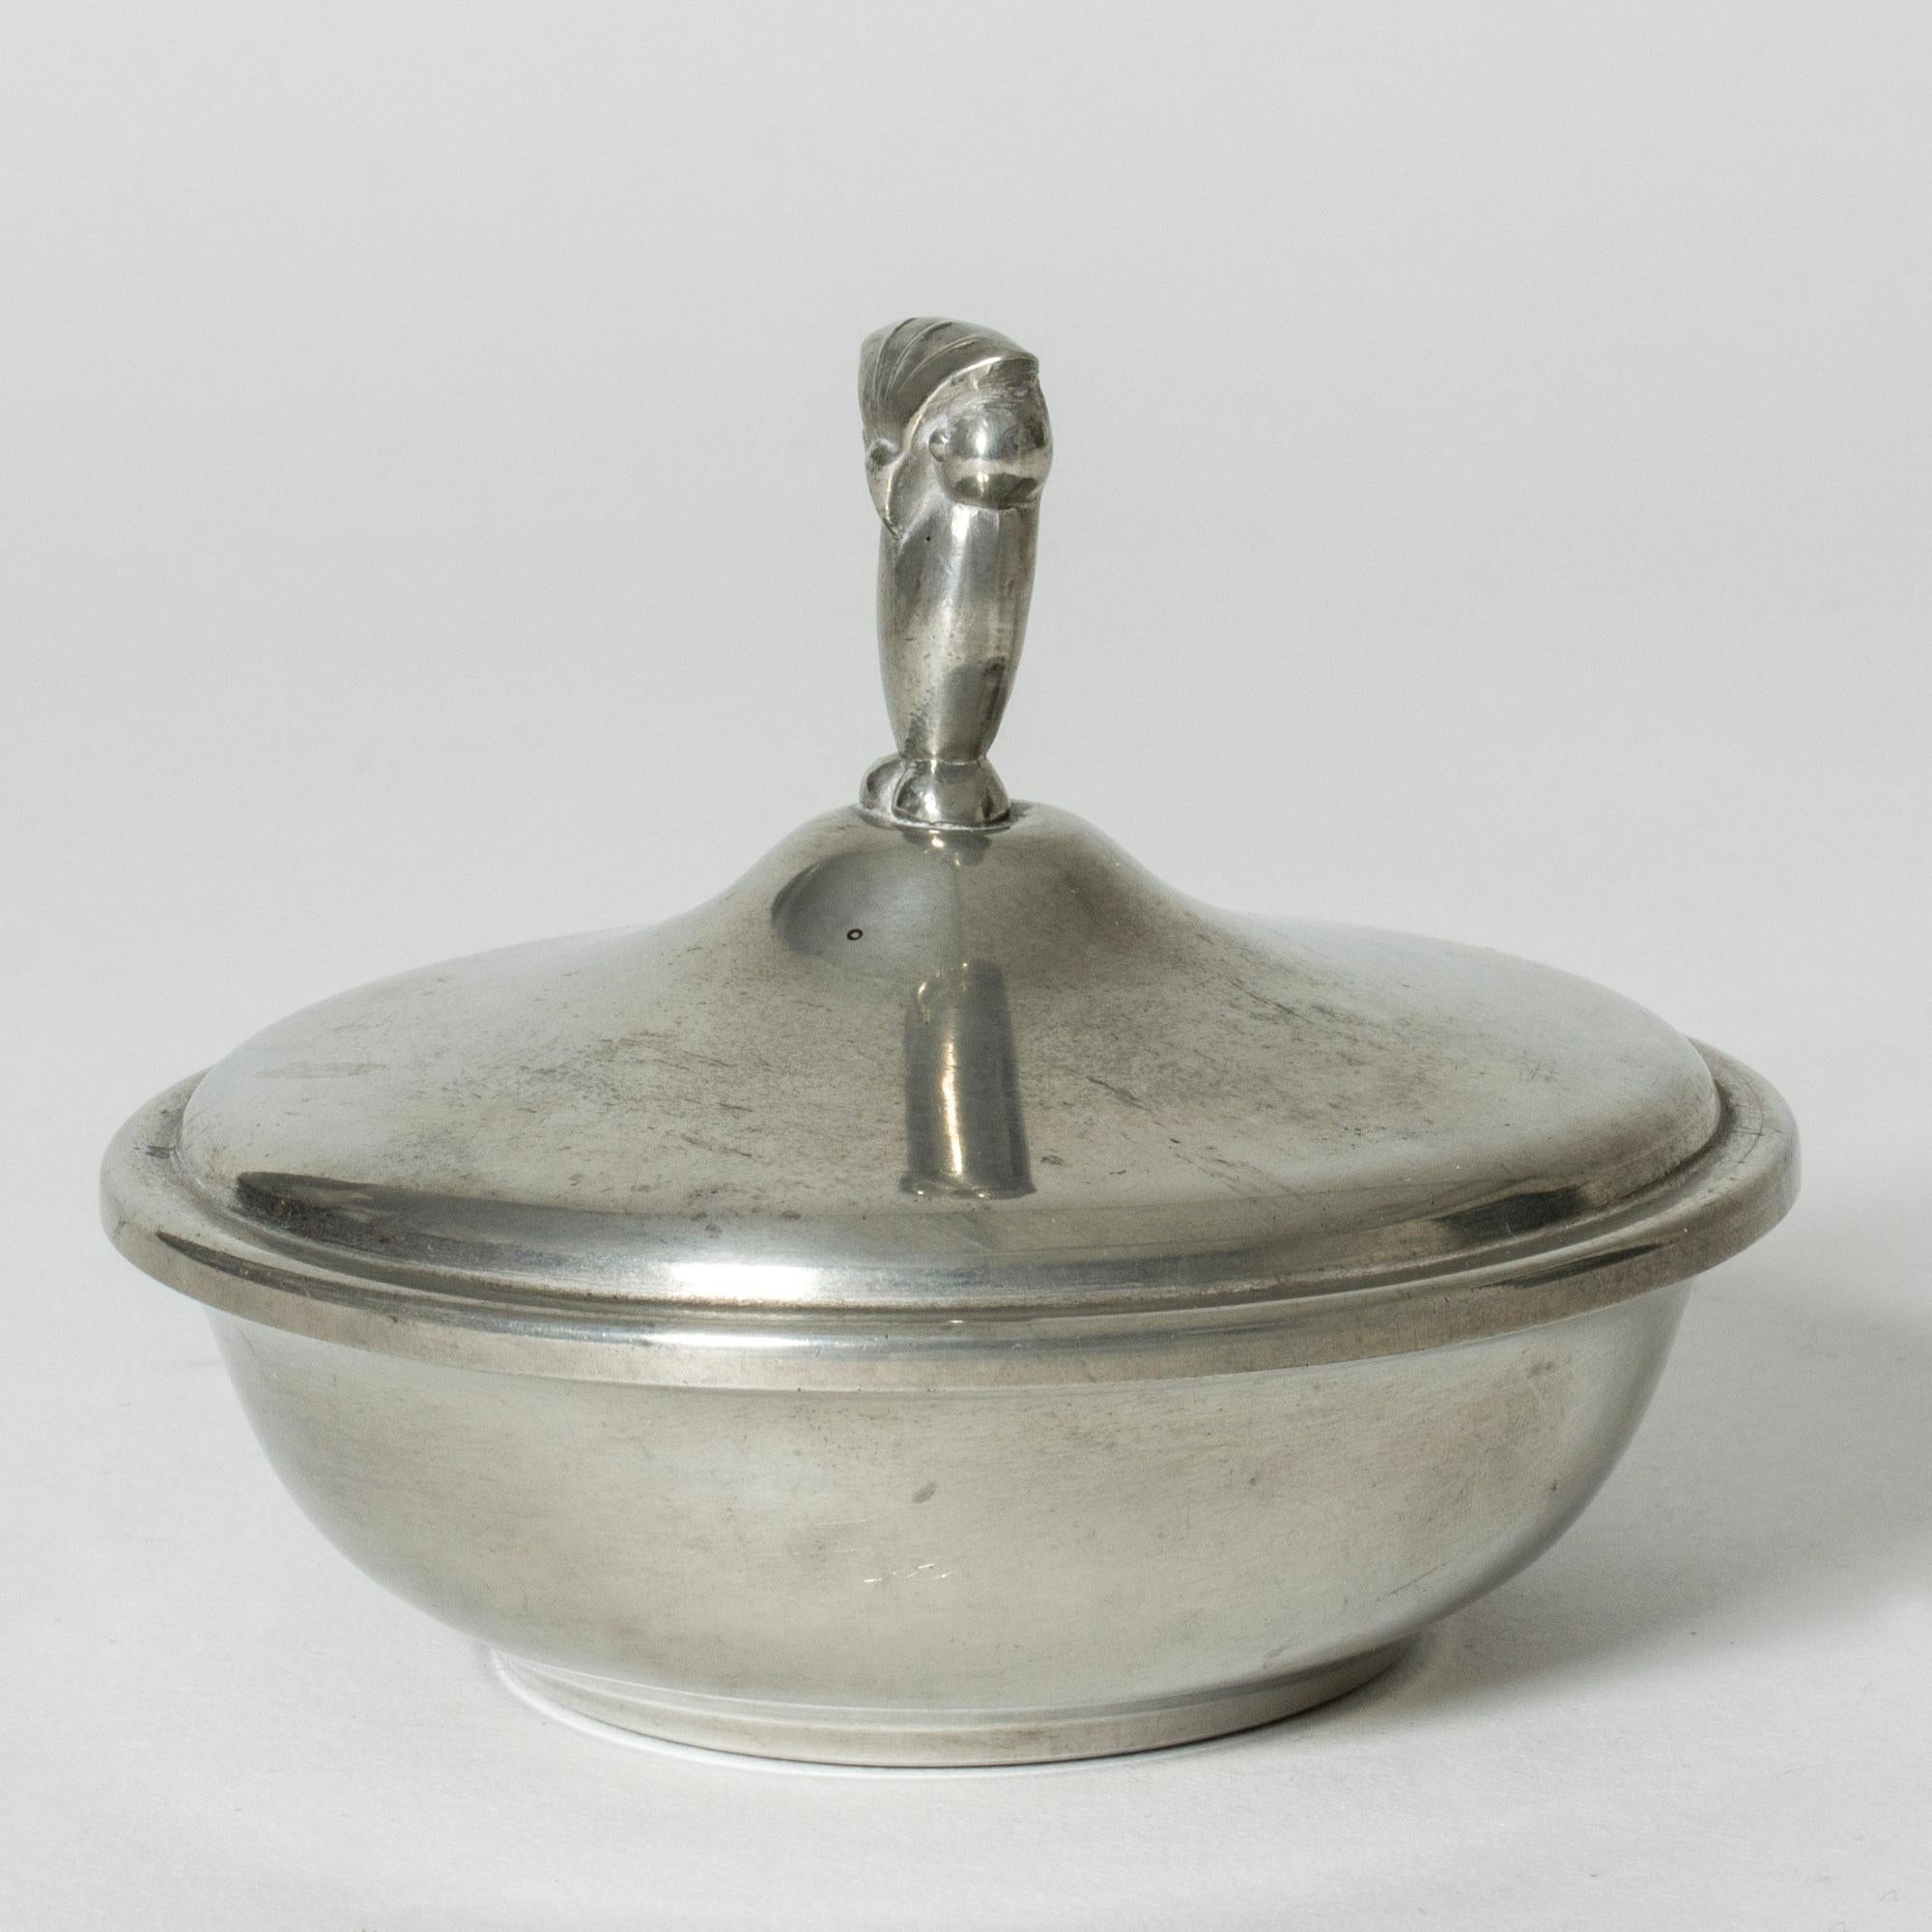 Gorgeous little pewter jar from GAB, with a stern looking owl acting as a knob.

GAB was founded in Stockholm in 1867 and was an important influence on the Swedish art and crafts and industrial design scenes for more than a century. Jakob Ängman,